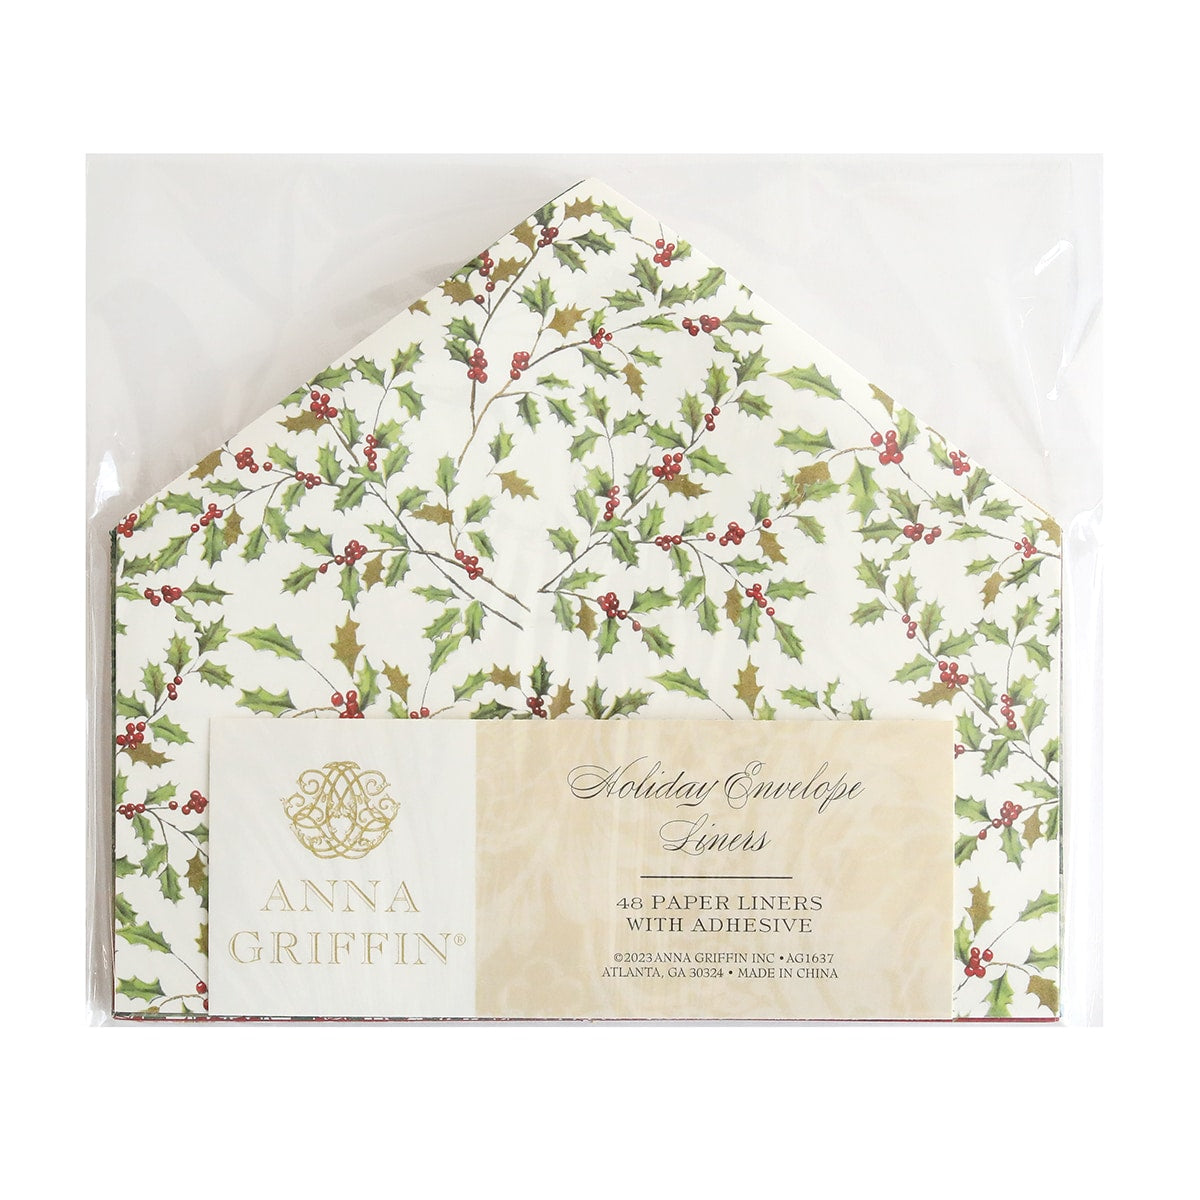 Anna Griffin Holiday 5 x 7 Envelope Liners Set of 48